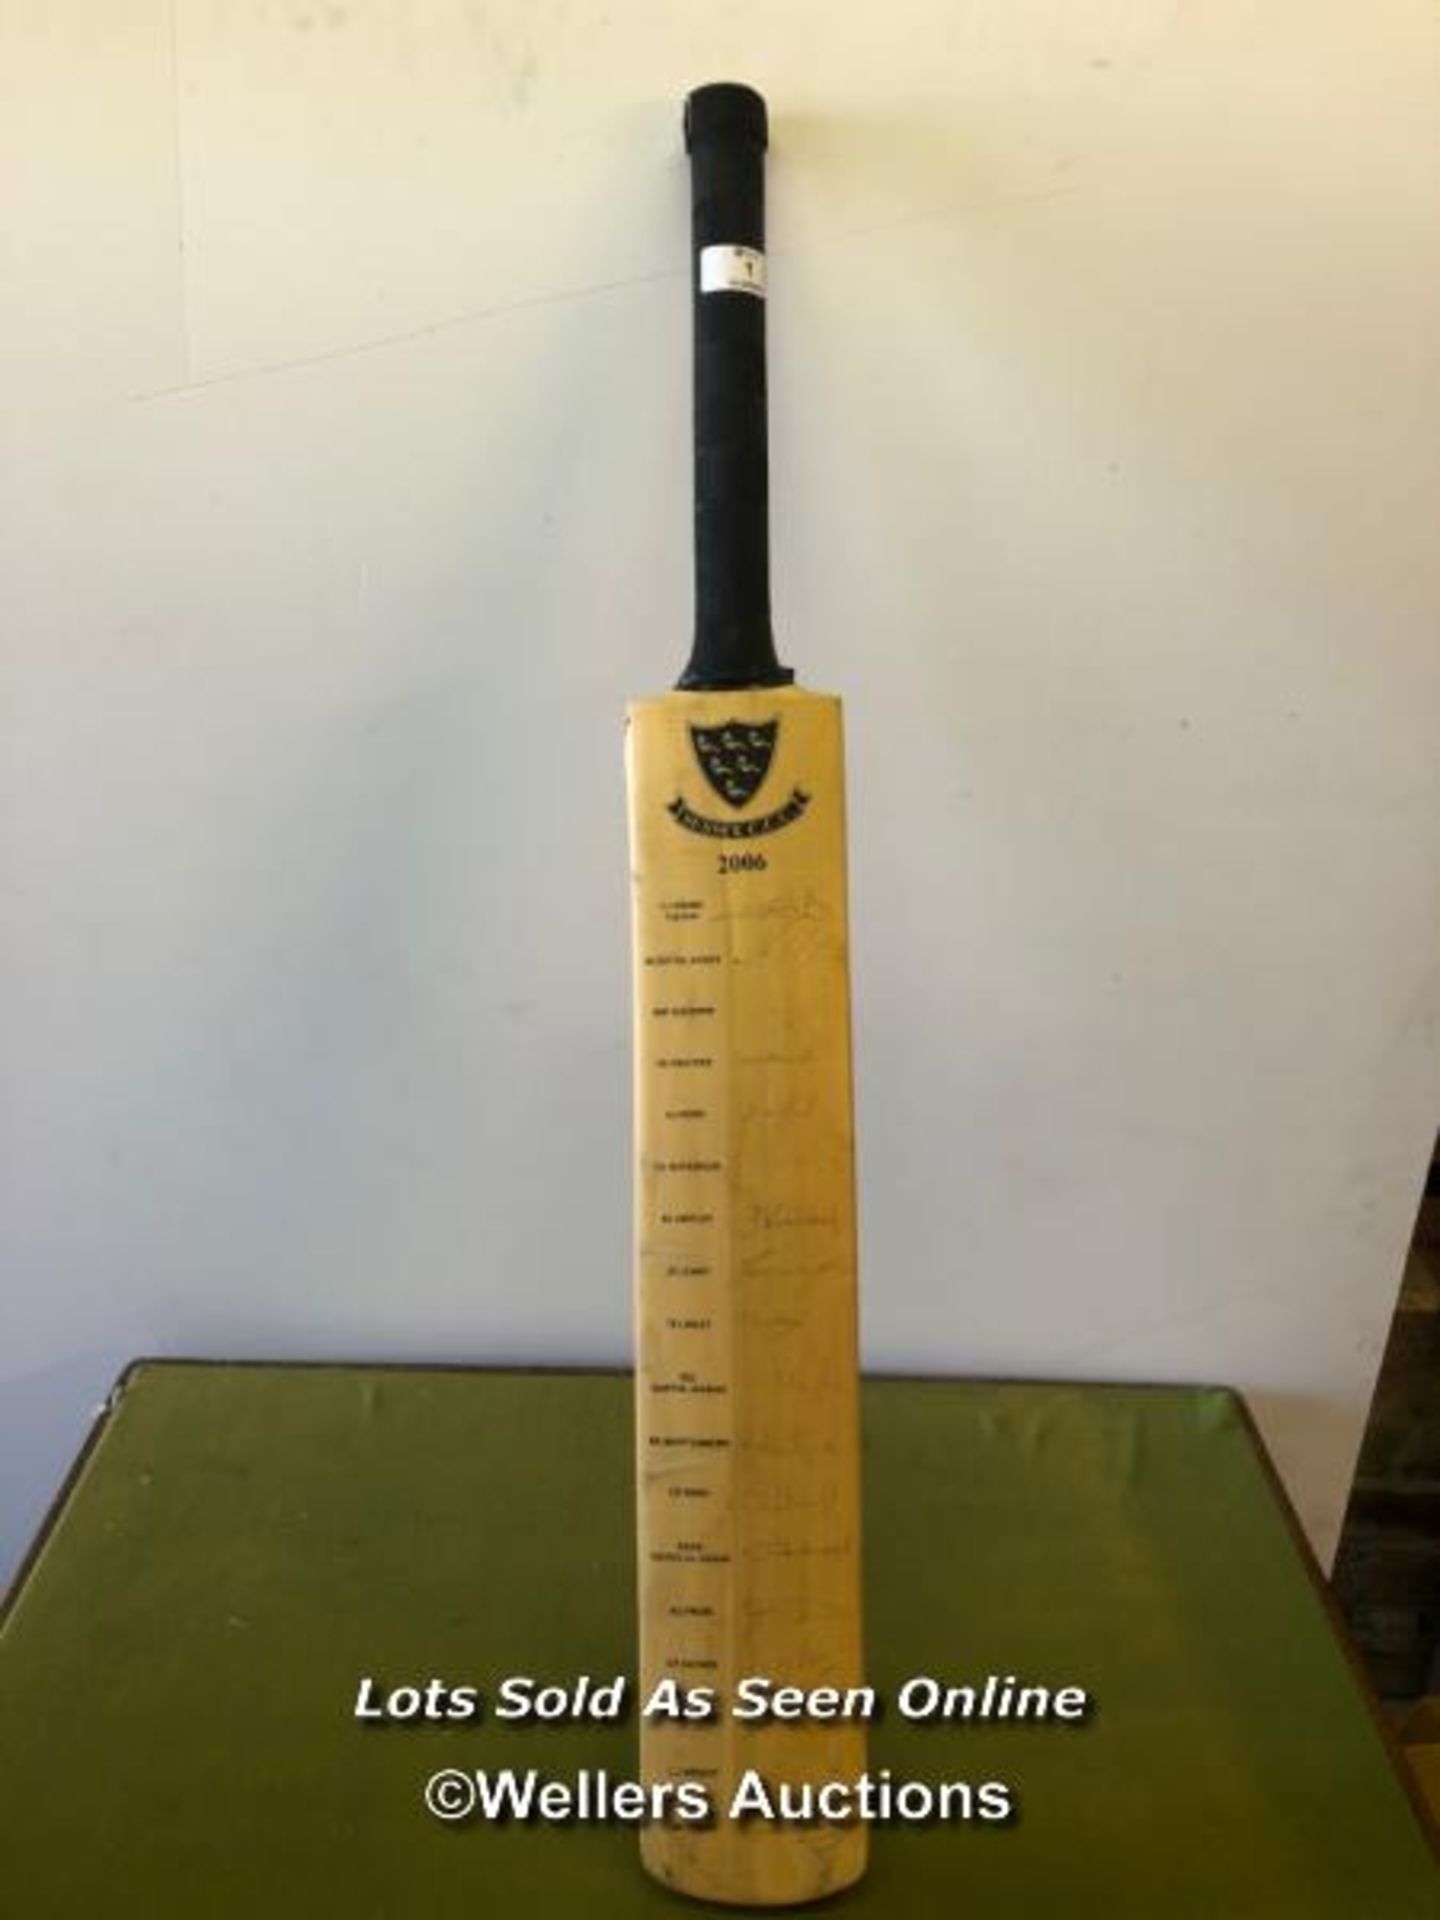 CRICKET BAT SIGNED BY THE SUSSEX CCC 2006, INCLUDING MATT PRIOR'S SIGNATURE